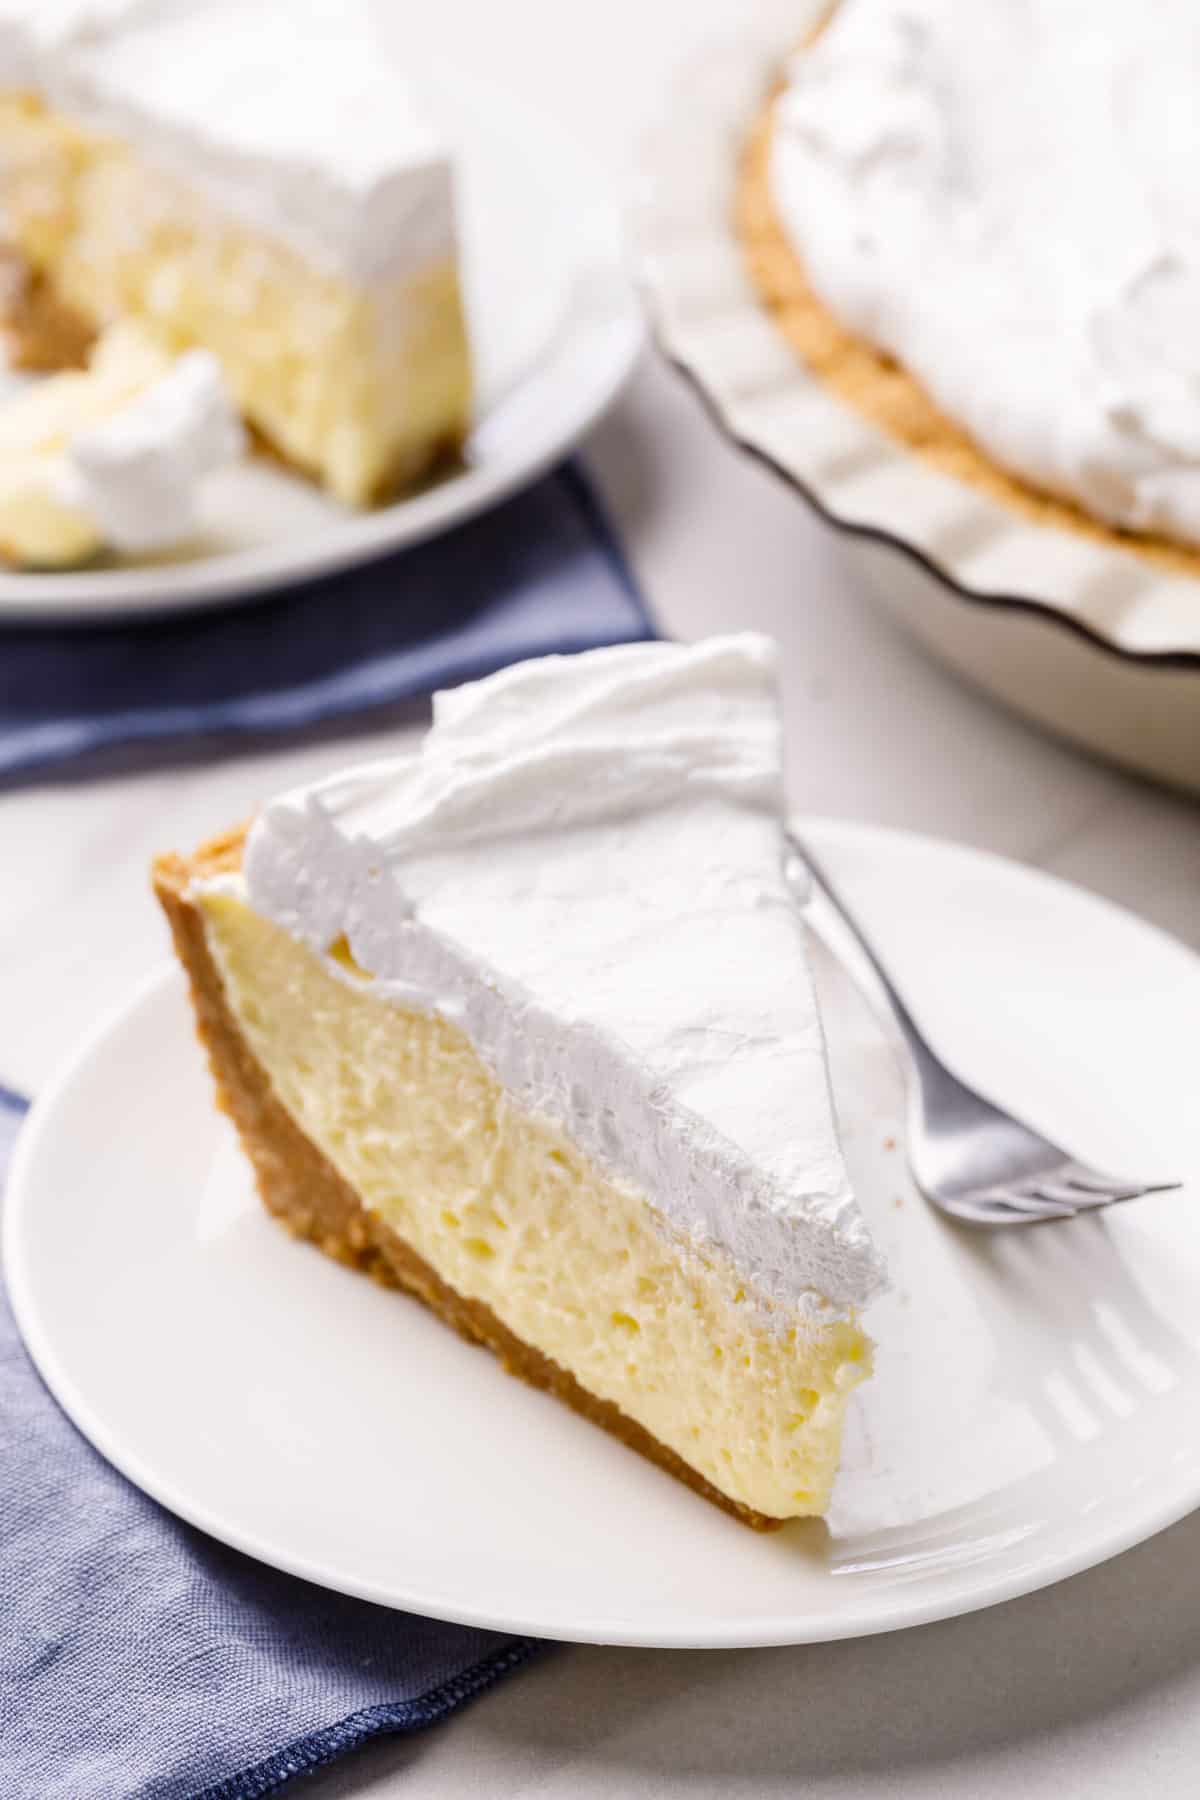 slice of banana cream pie served on a white round plate with a silver fork